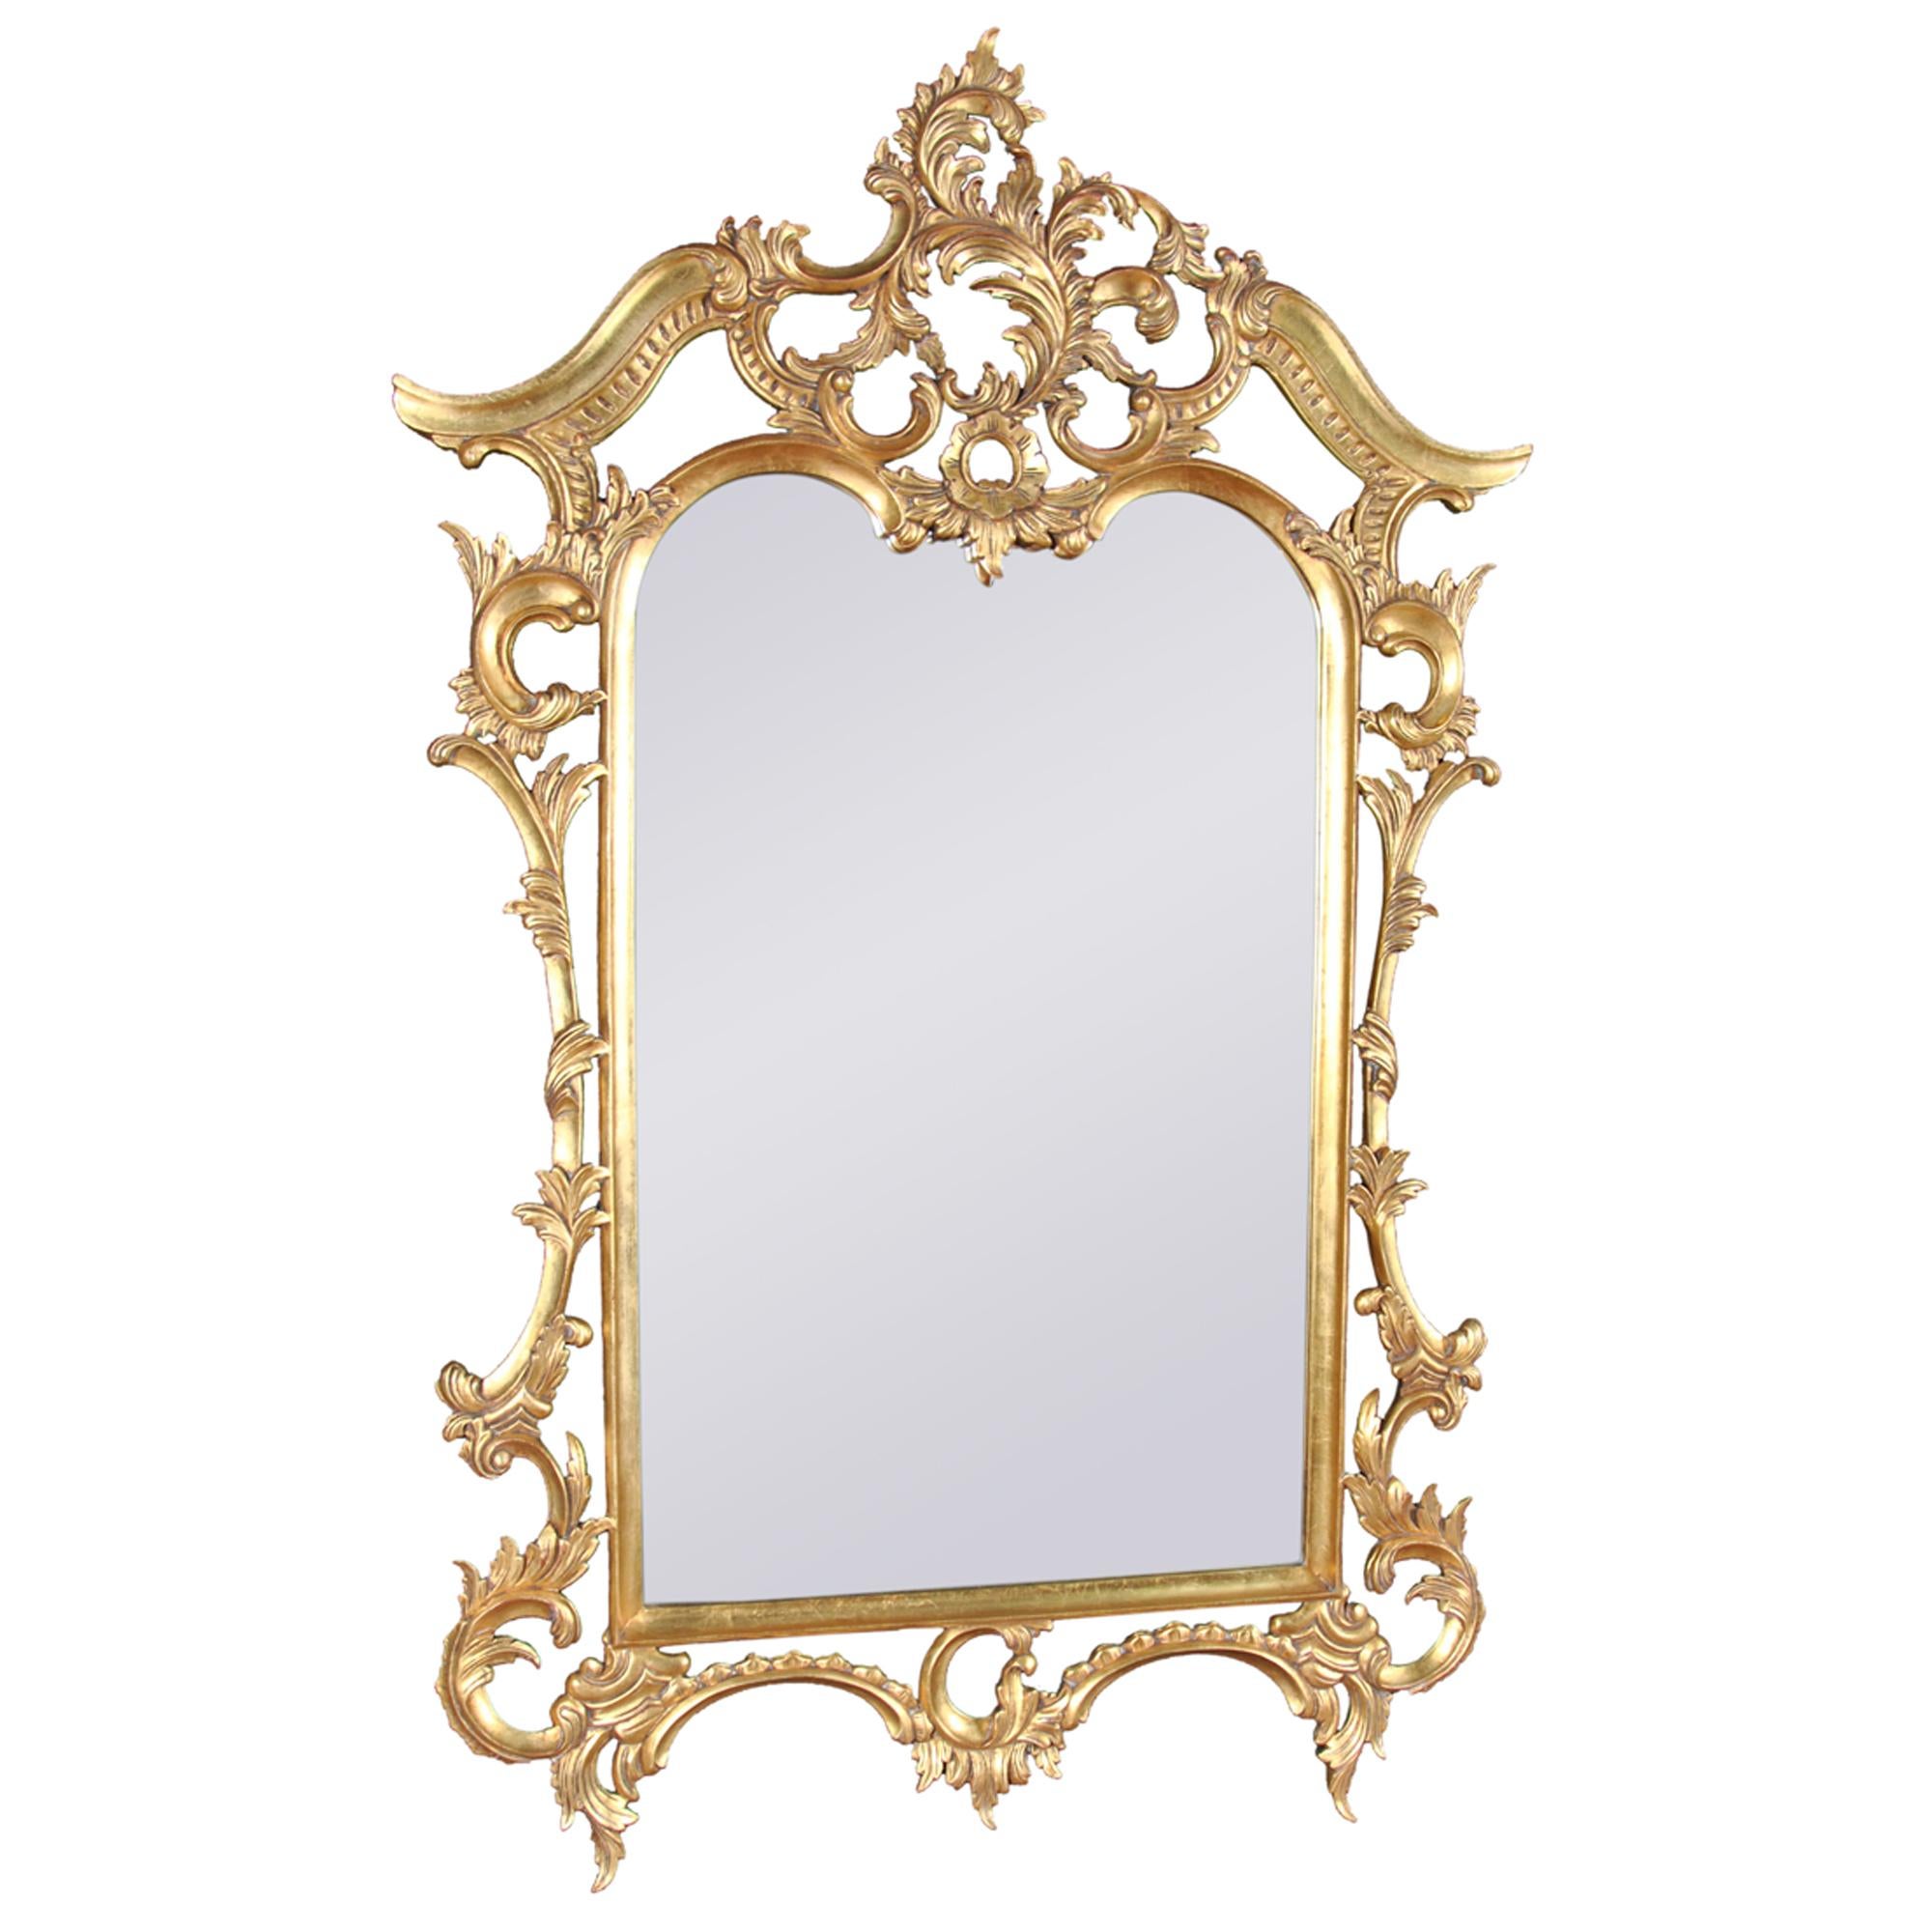 A Chippendale Gold Leaf Mirror from Niagara Furniture, the bevelled glass having been hand cut and fitted to the hand carved and hand pierced frame. Our finest reproduction solid wood mirror frame.

Measures 40″w x 2″d x 63″h metric 102  5  160

